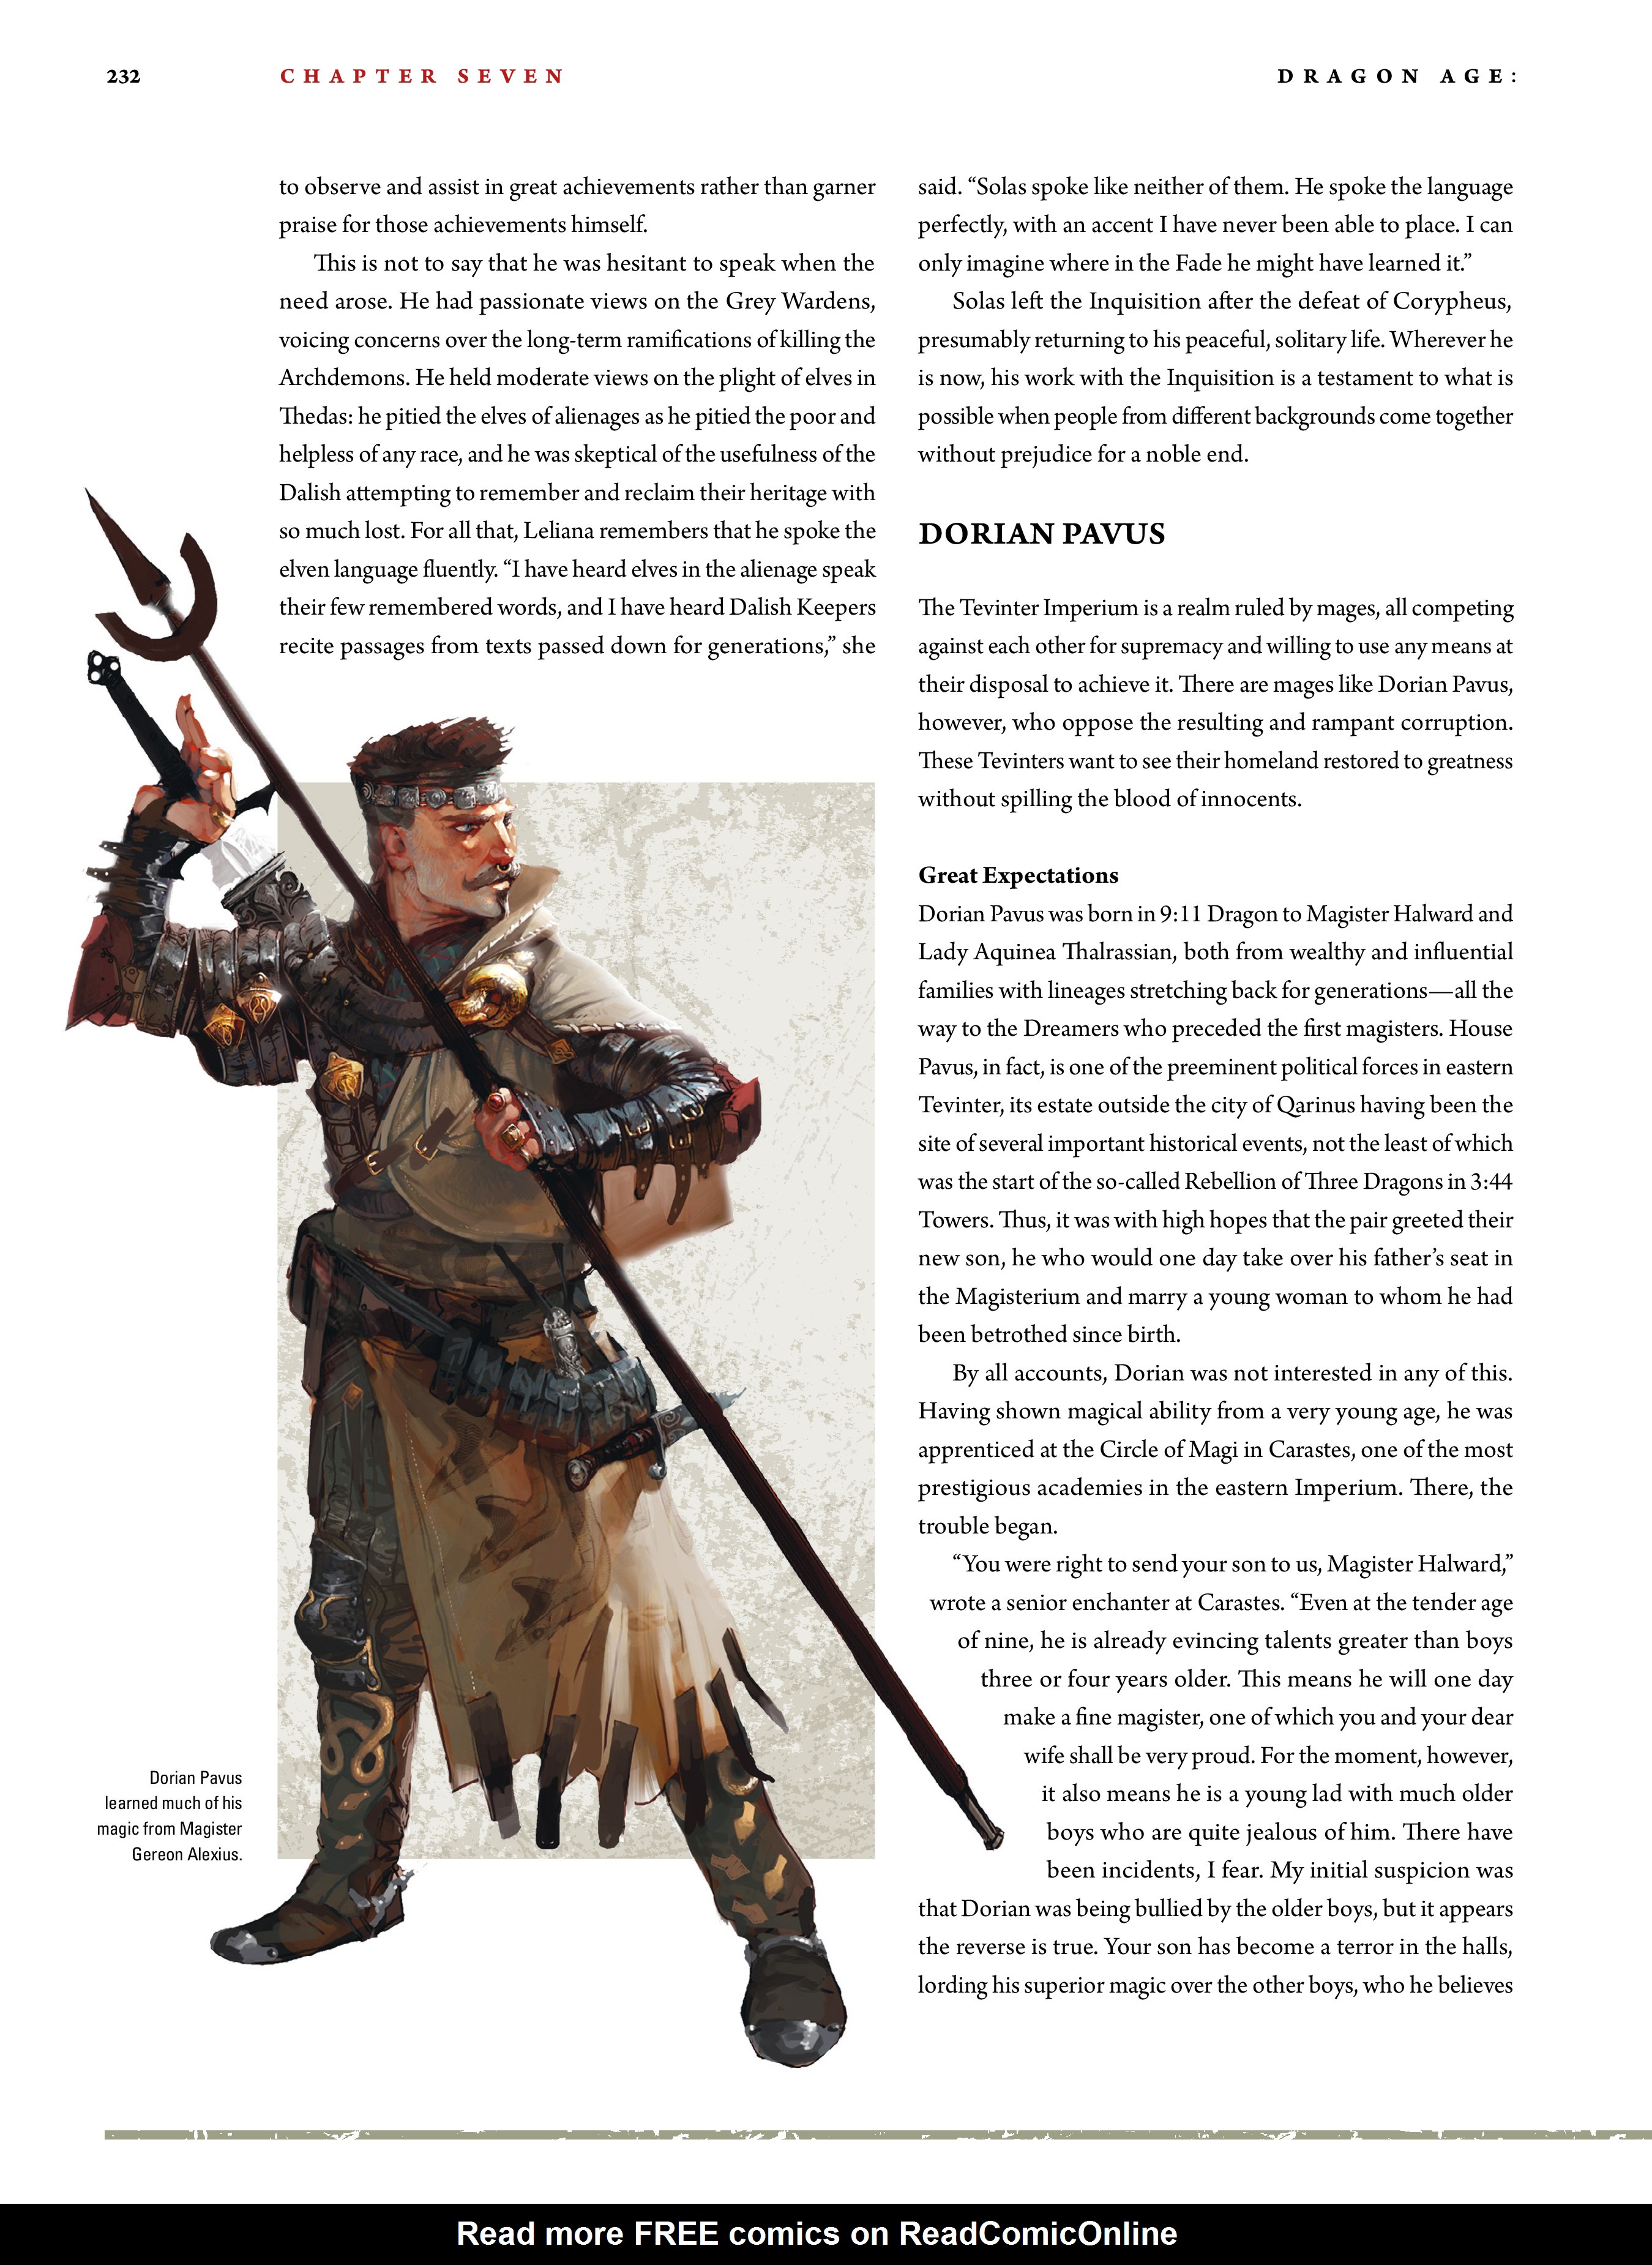 Read online Dragon Age: The World of Thedas comic -  Issue # TPB 2 - 227